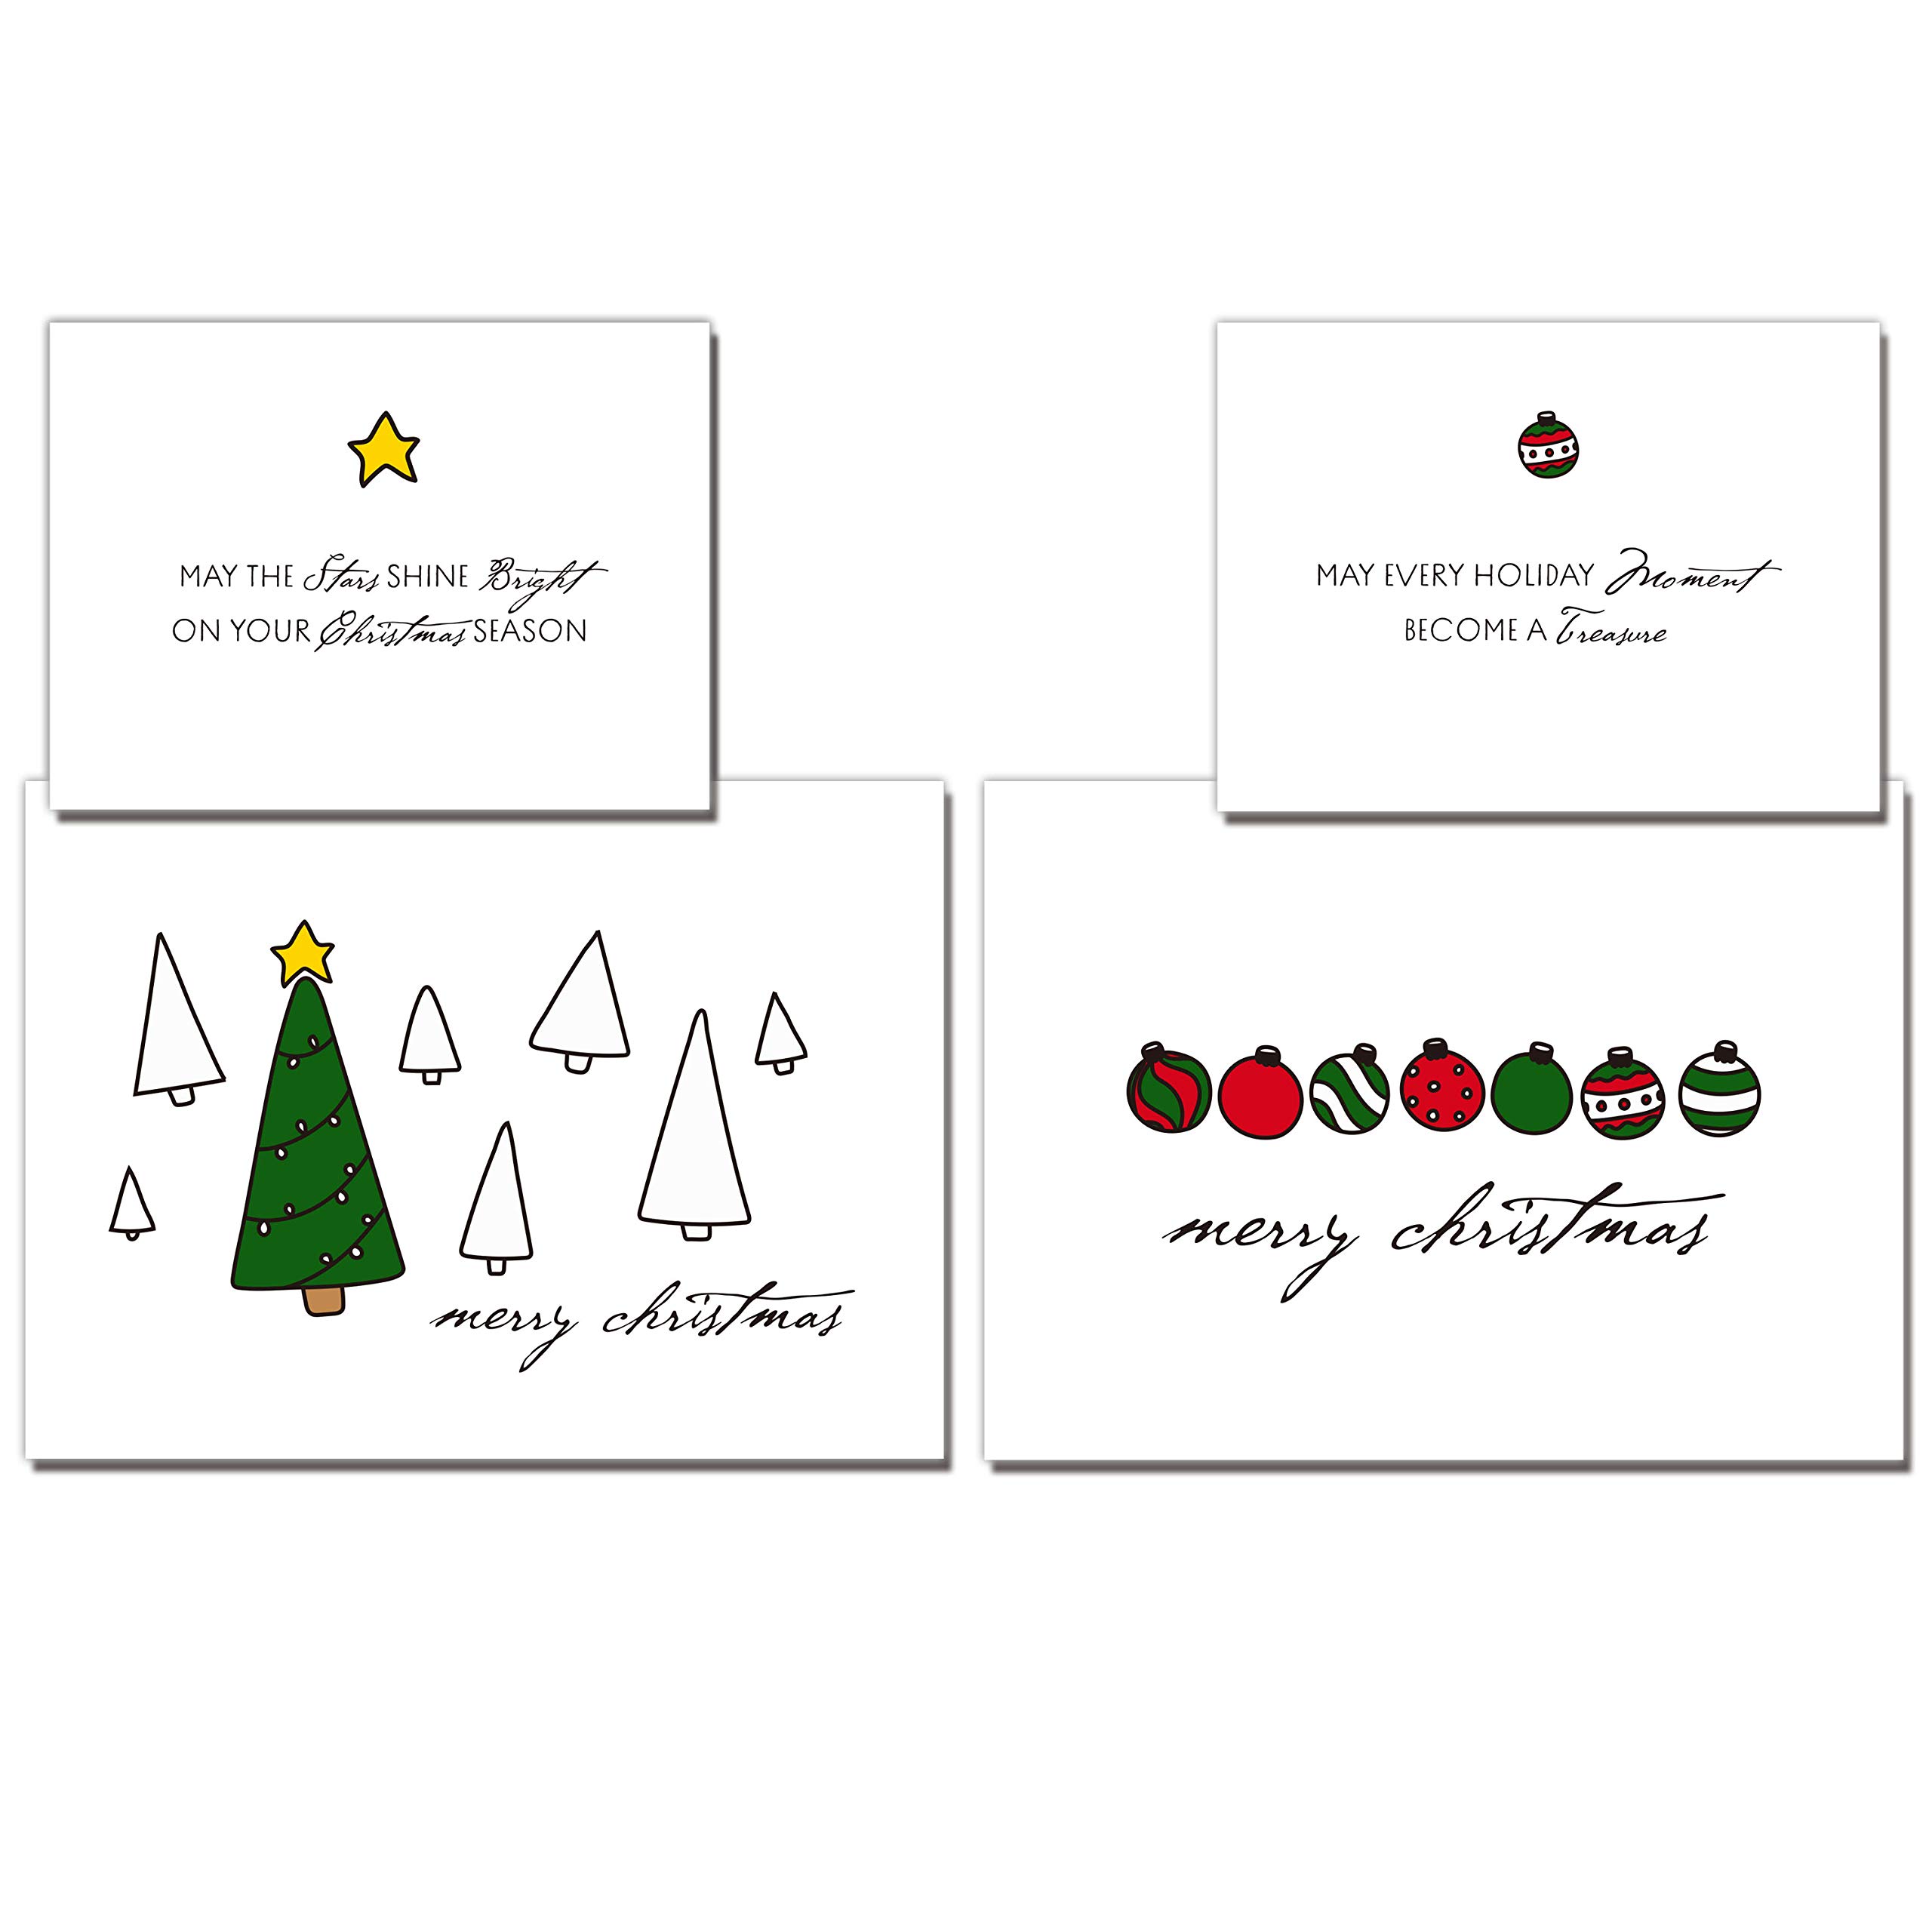 72 Piece Holiday Christmas Greeting Cards with 8 Artistic Greeting Designs & Envelopes 6.25” x 4.6